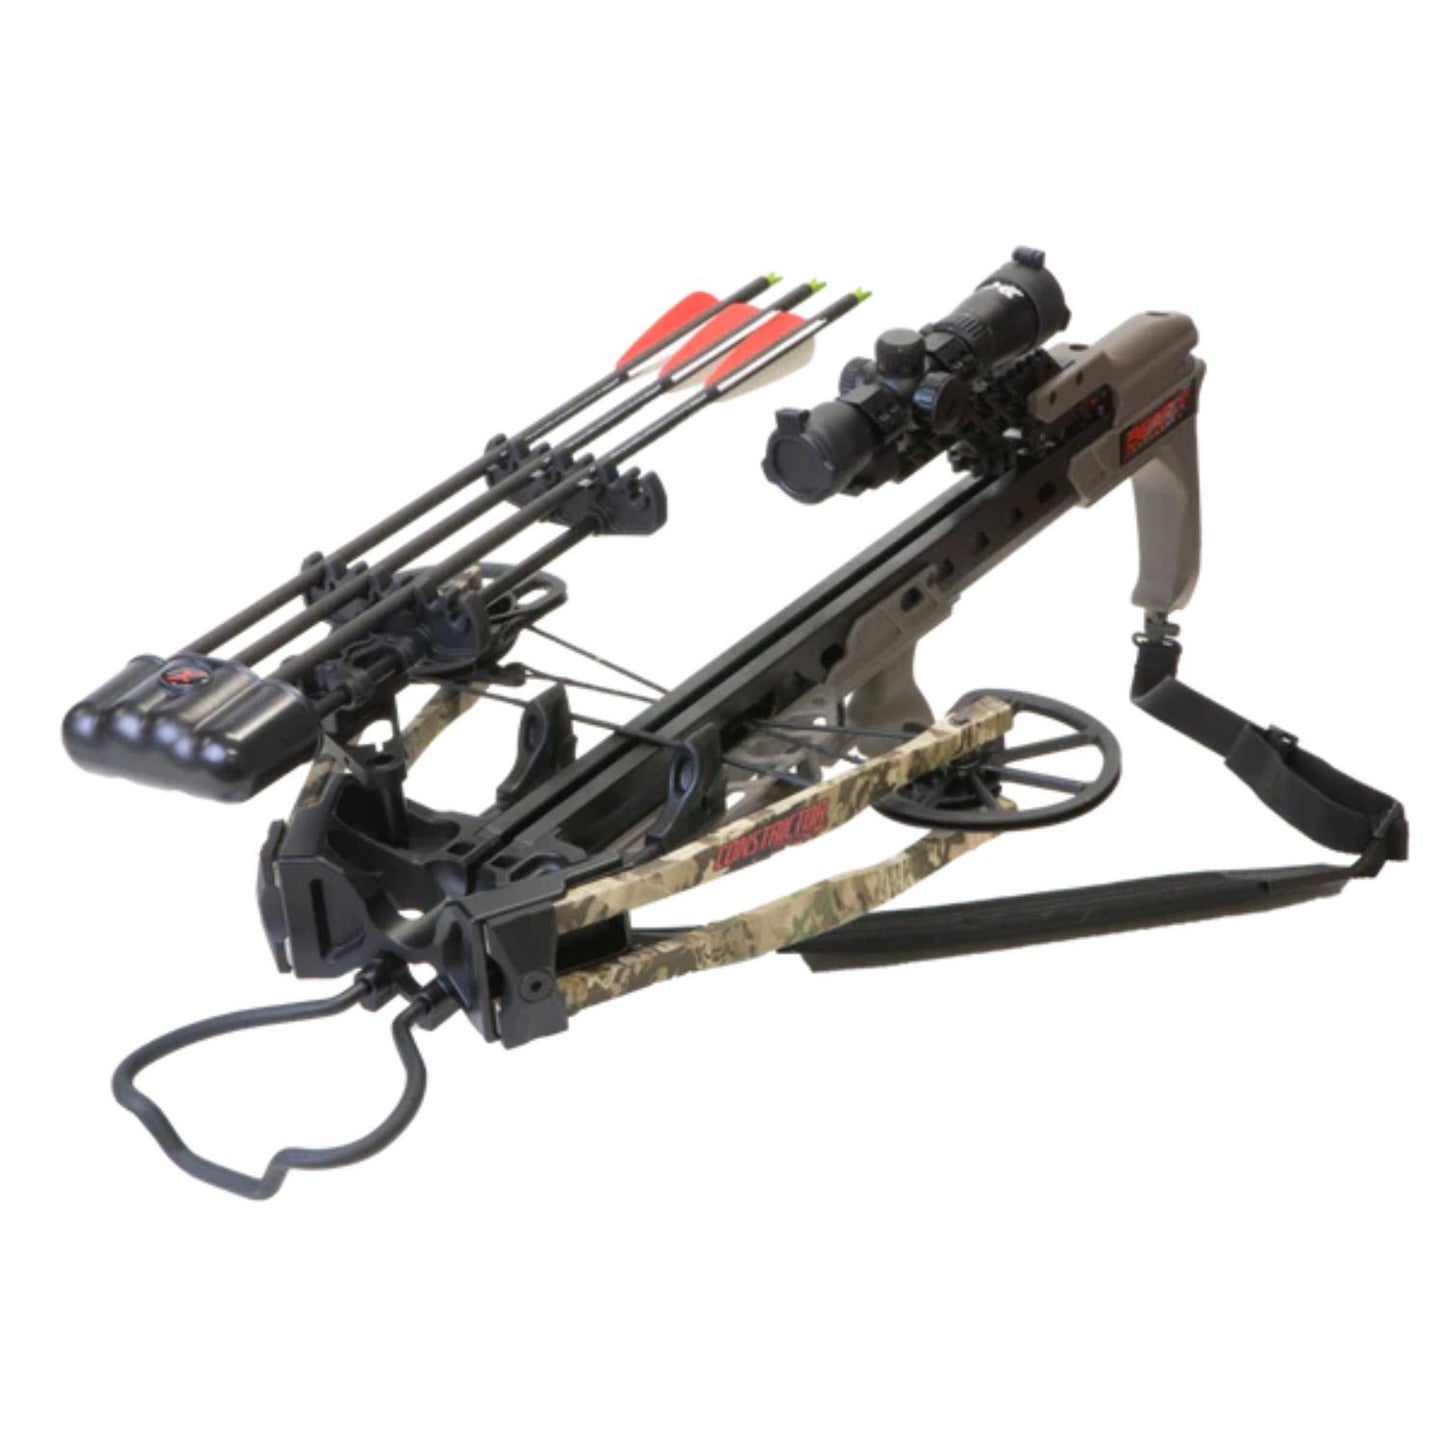 Bear X Constrictor Pro Crossbow Package